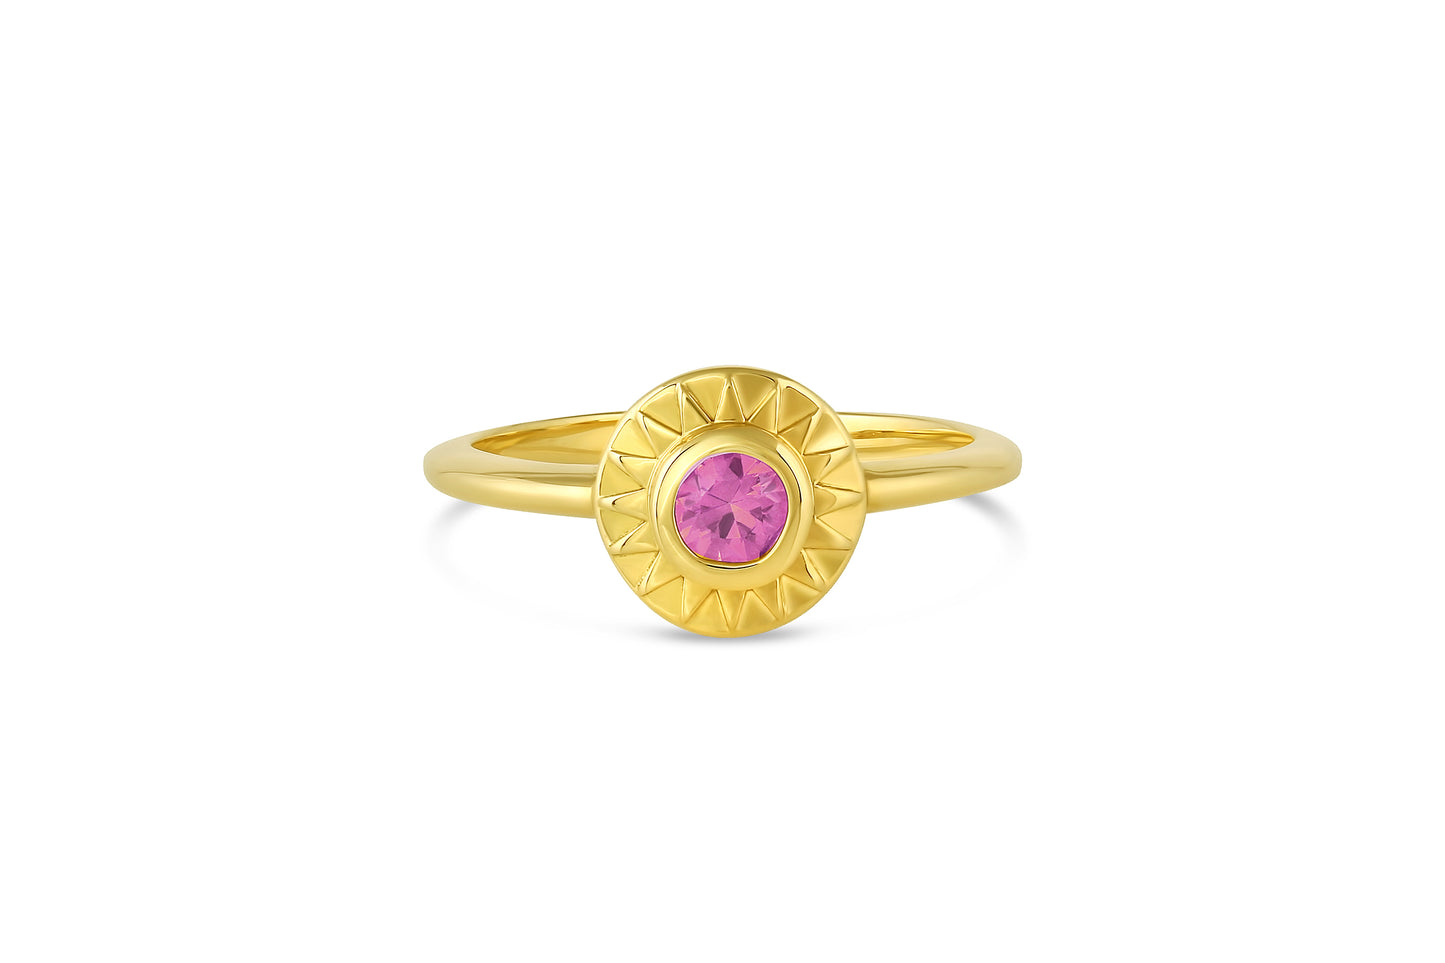 Load image into Gallery viewer, 18k yellow gold sunburst circle ring with pink sapphire center stone on white background.
